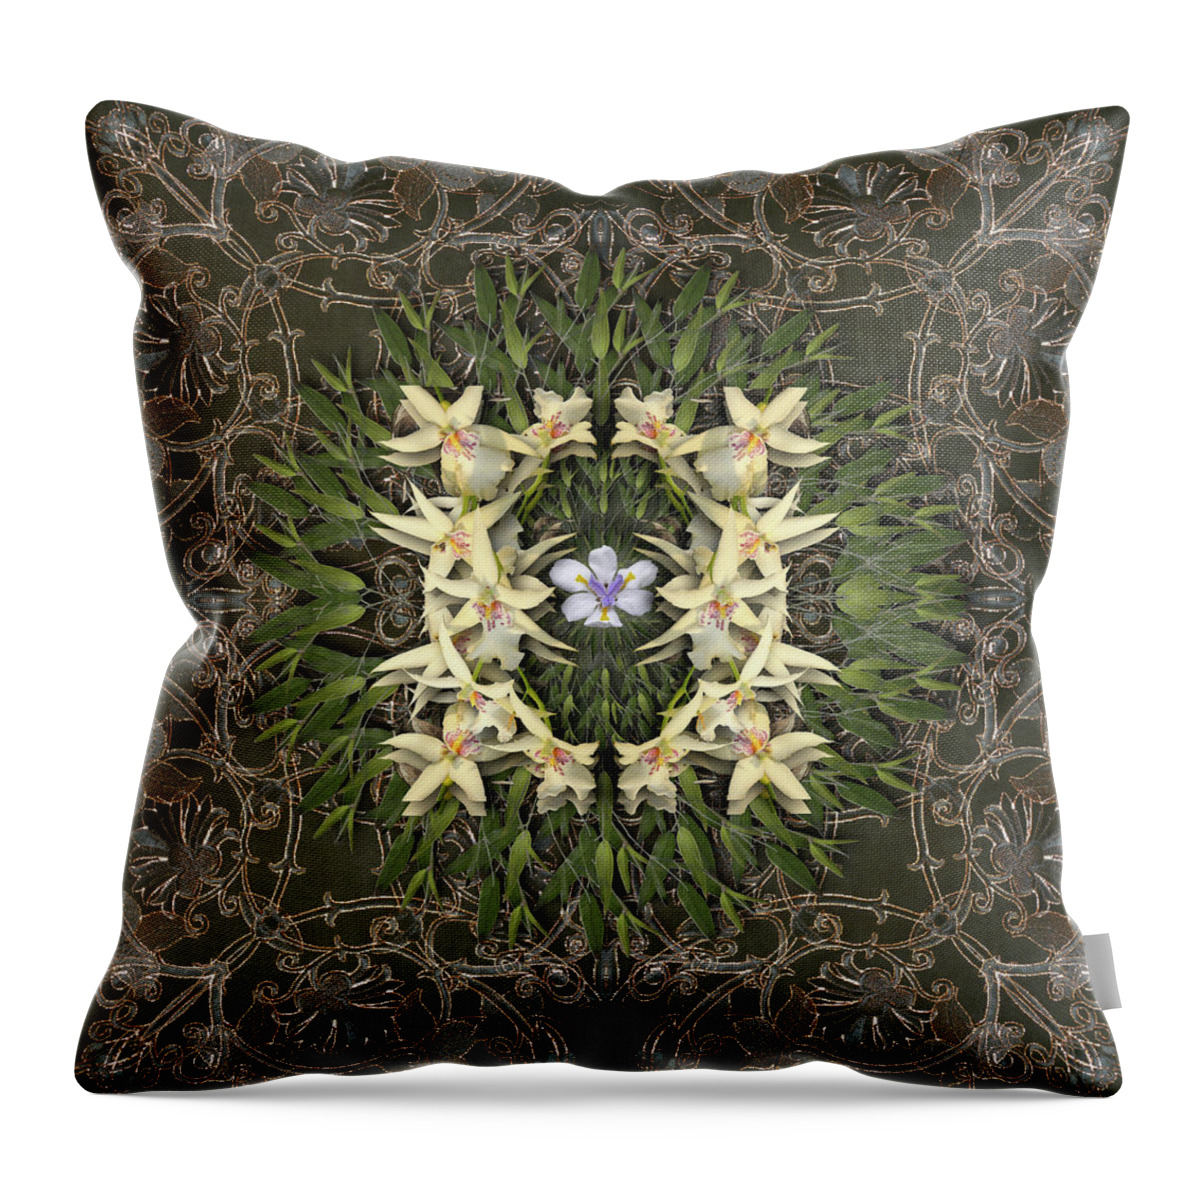 Flowers Throw Pillow featuring the photograph 4428 by Peter Holme III